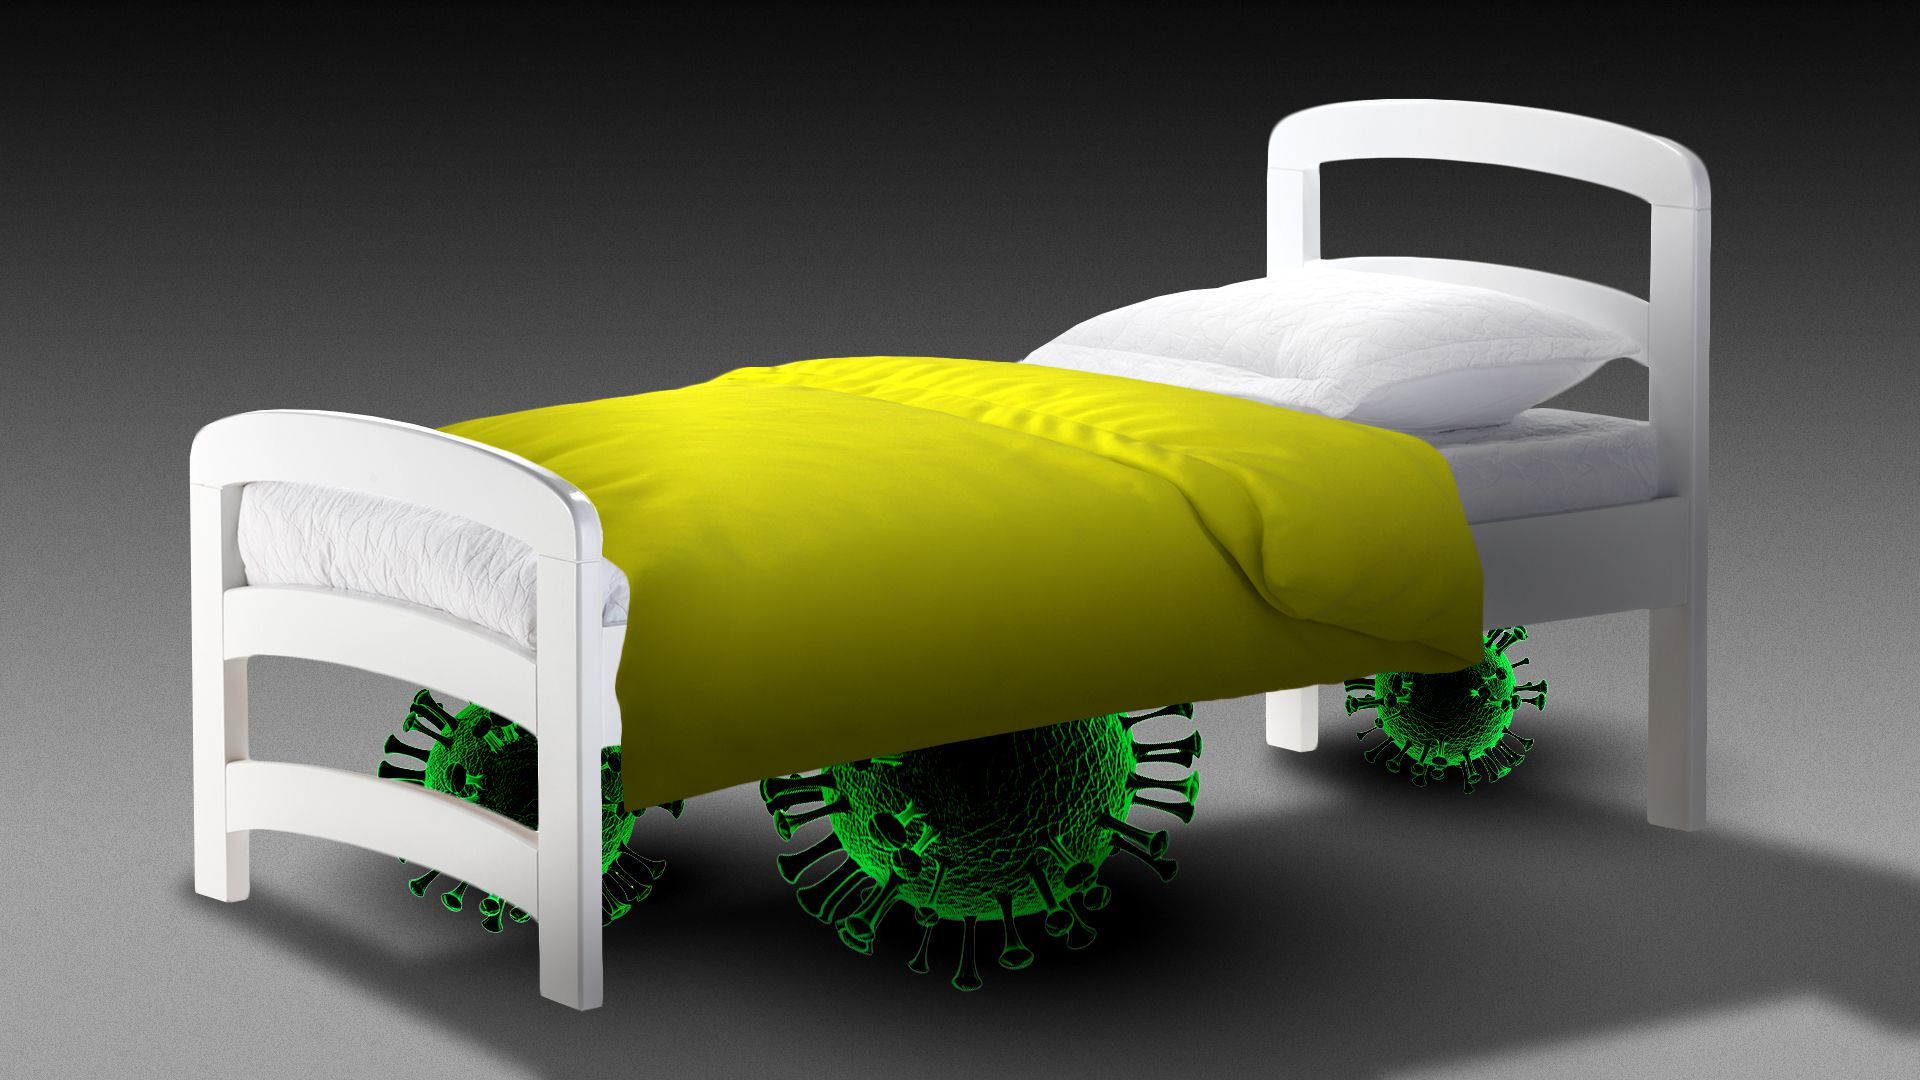 Illustration of COVID cells under a child's bed